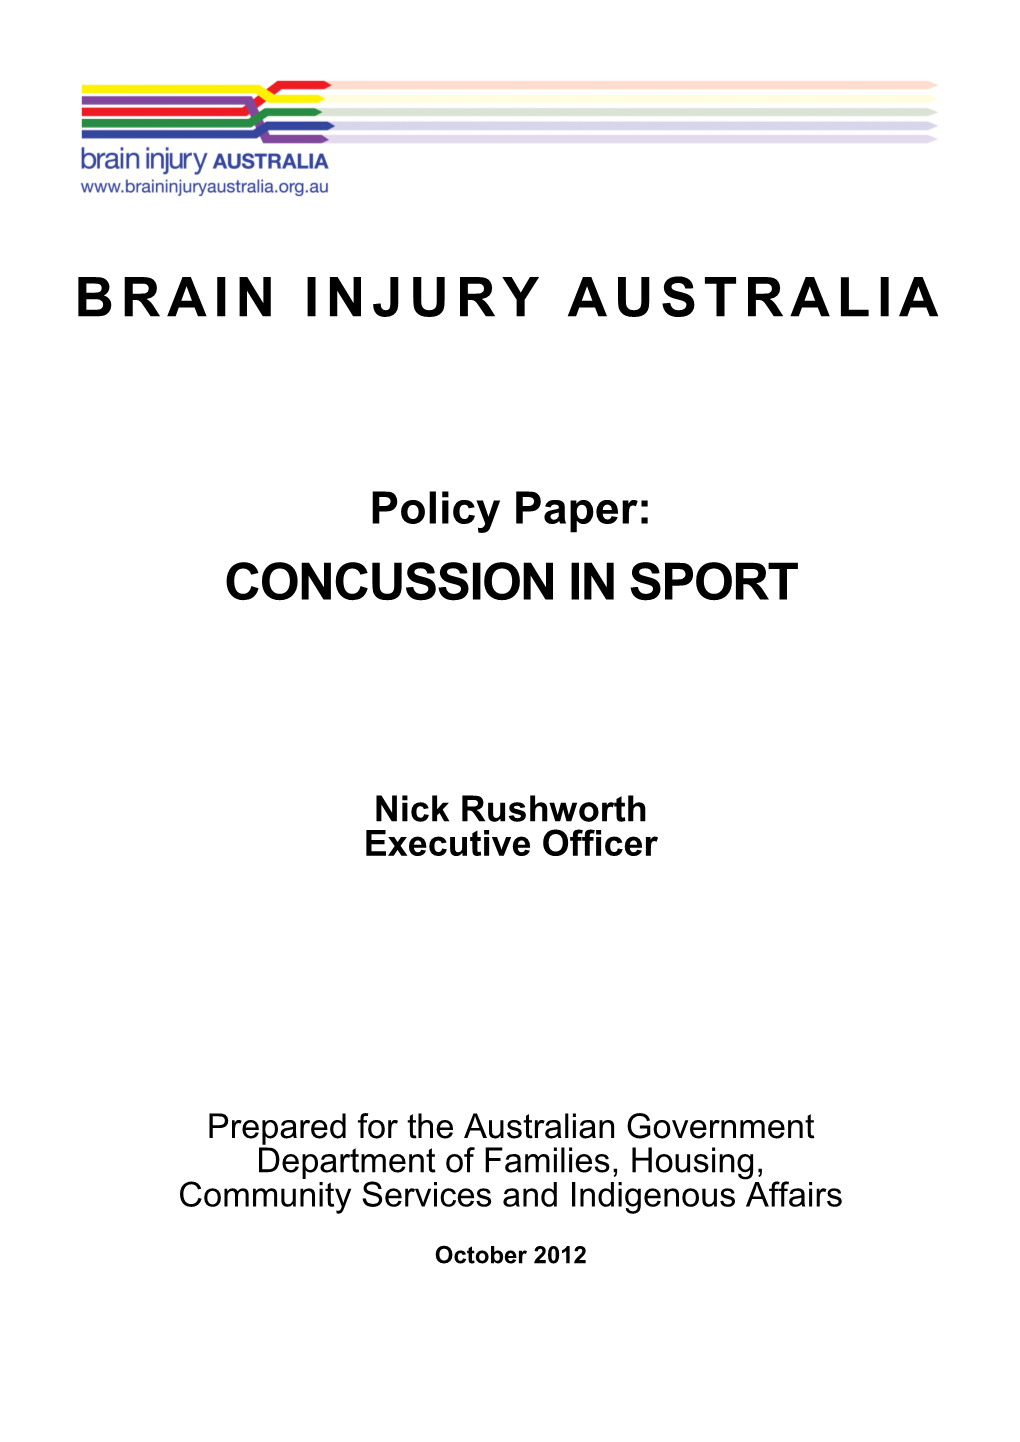 Download BIA's Concussion in Sport Policy Paper